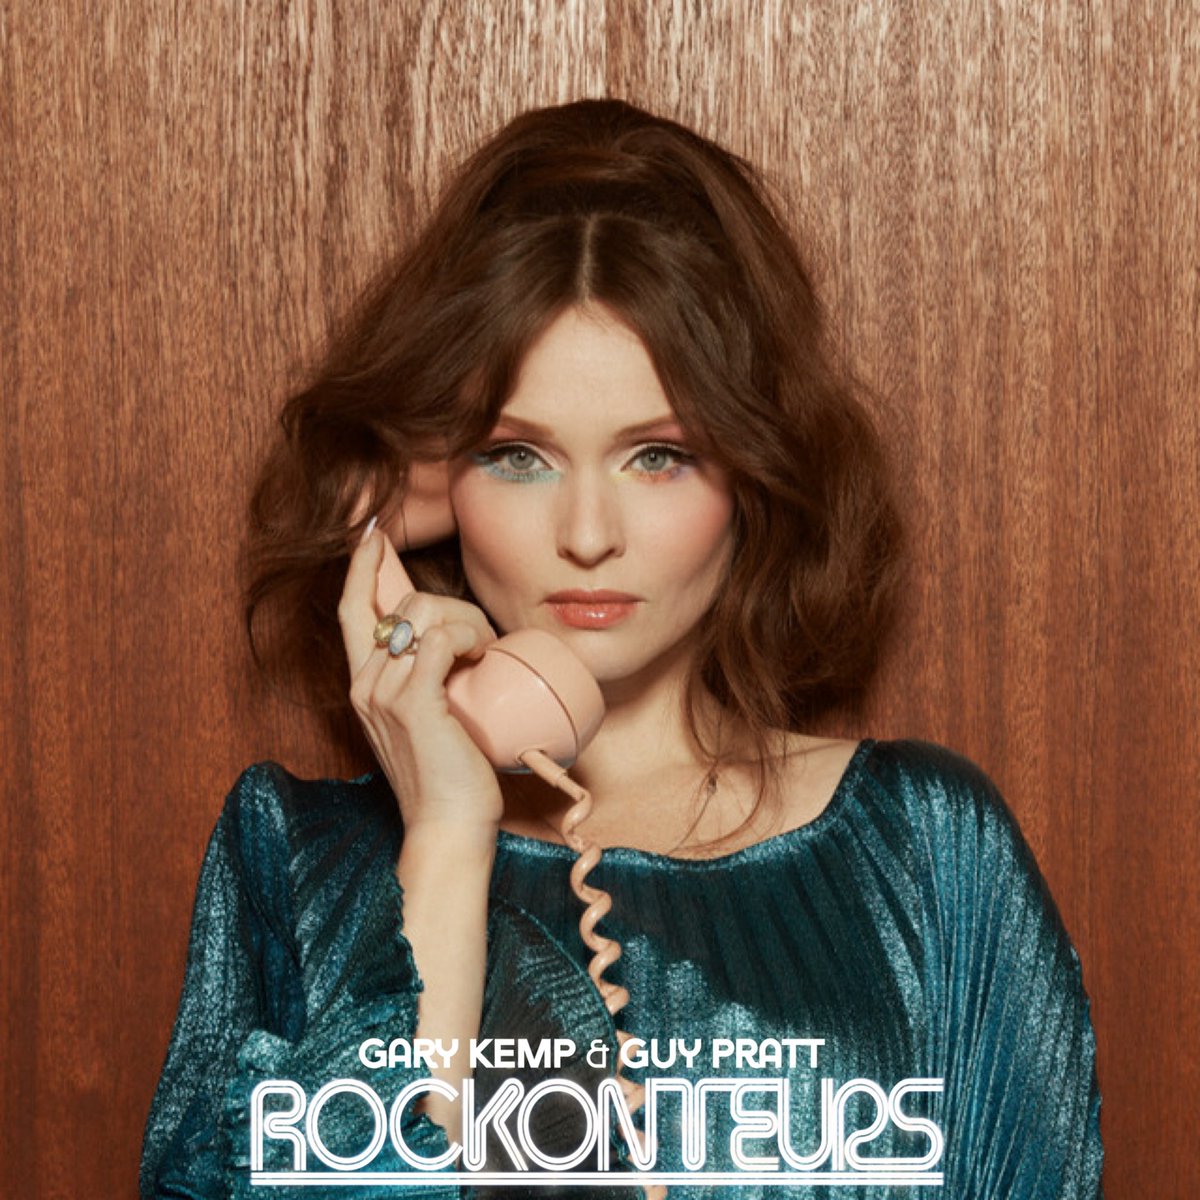 Tomorrow on Rockonteurs - @SophieEB joins @garyjkemp and @guypratt to talk about THAT song!!!